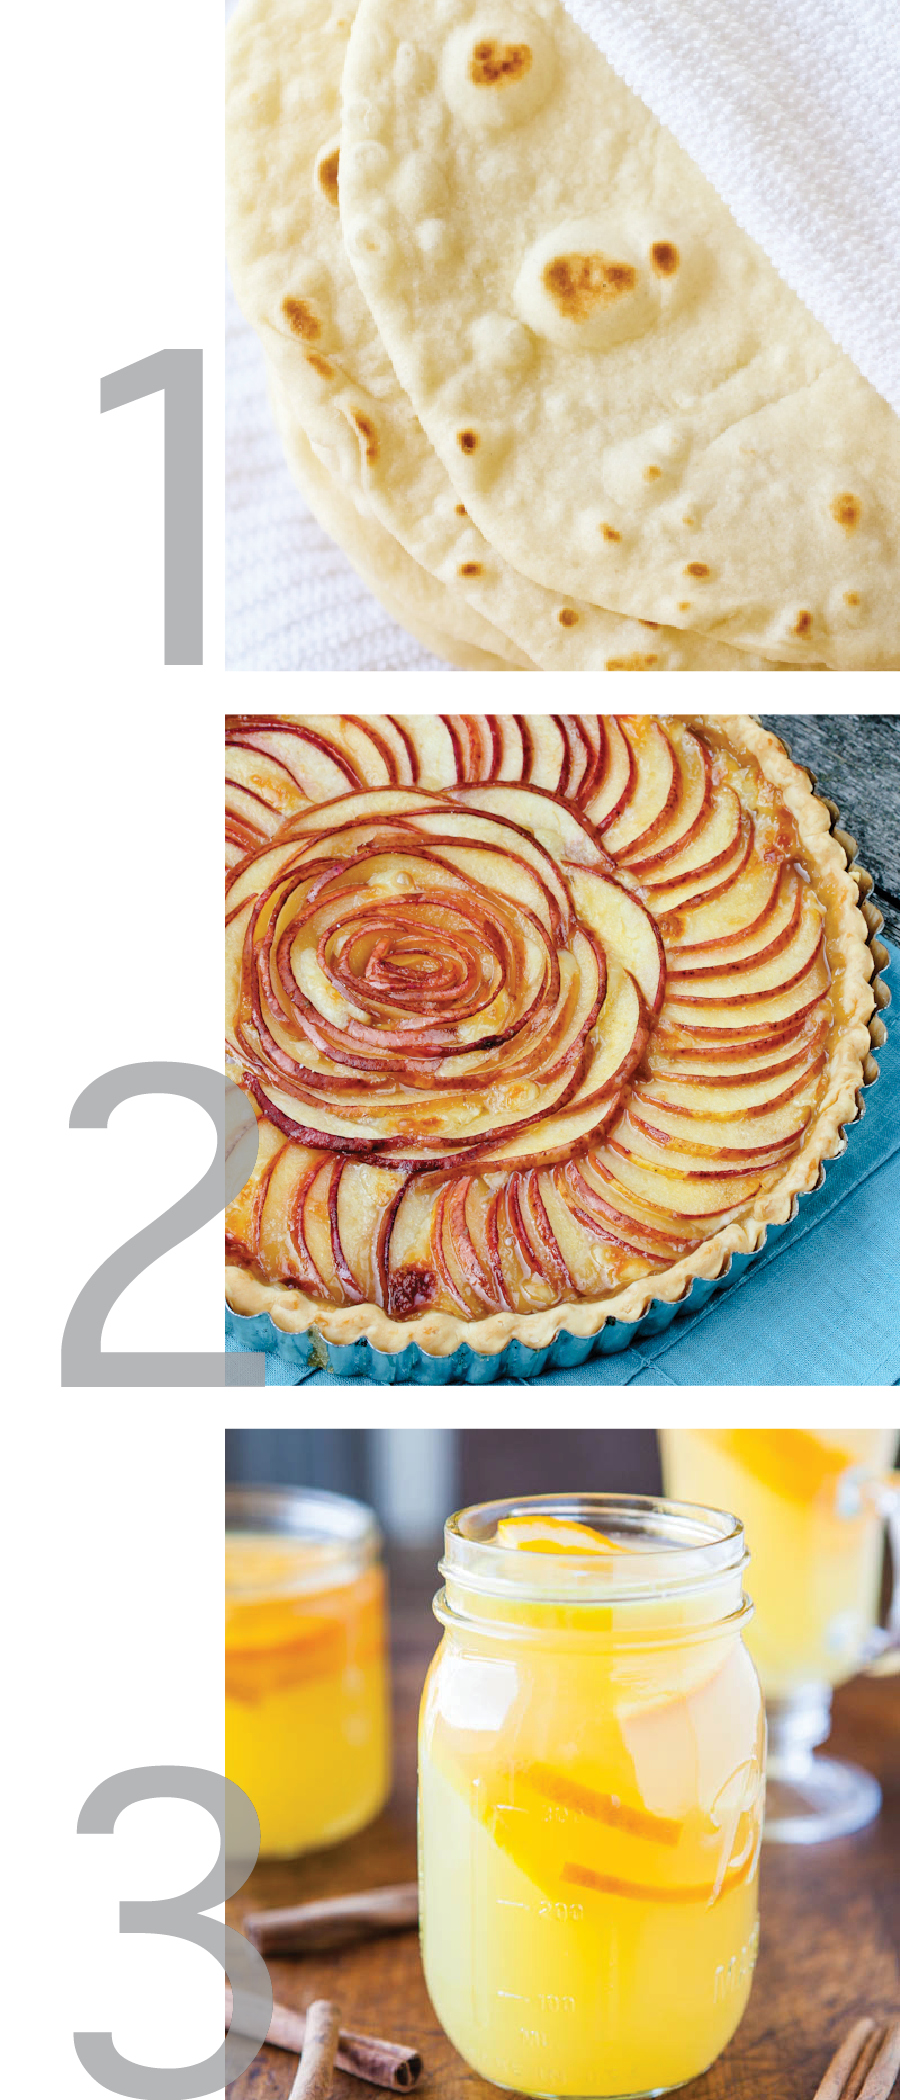 this image is a simple graphic with images for Homemade Tortillas, Brie and Pear Tart, and Chai Spiced Triple Citrus Tea